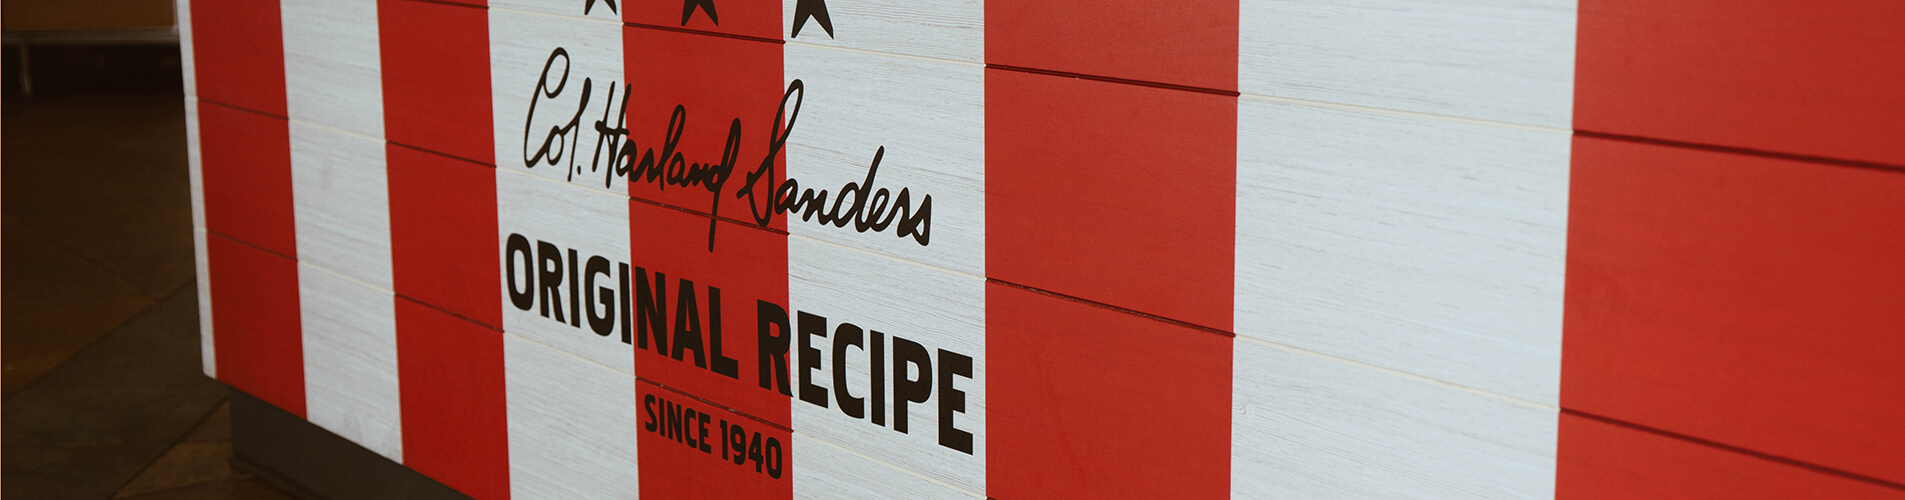 Red and white wall that says "Original Recipe"